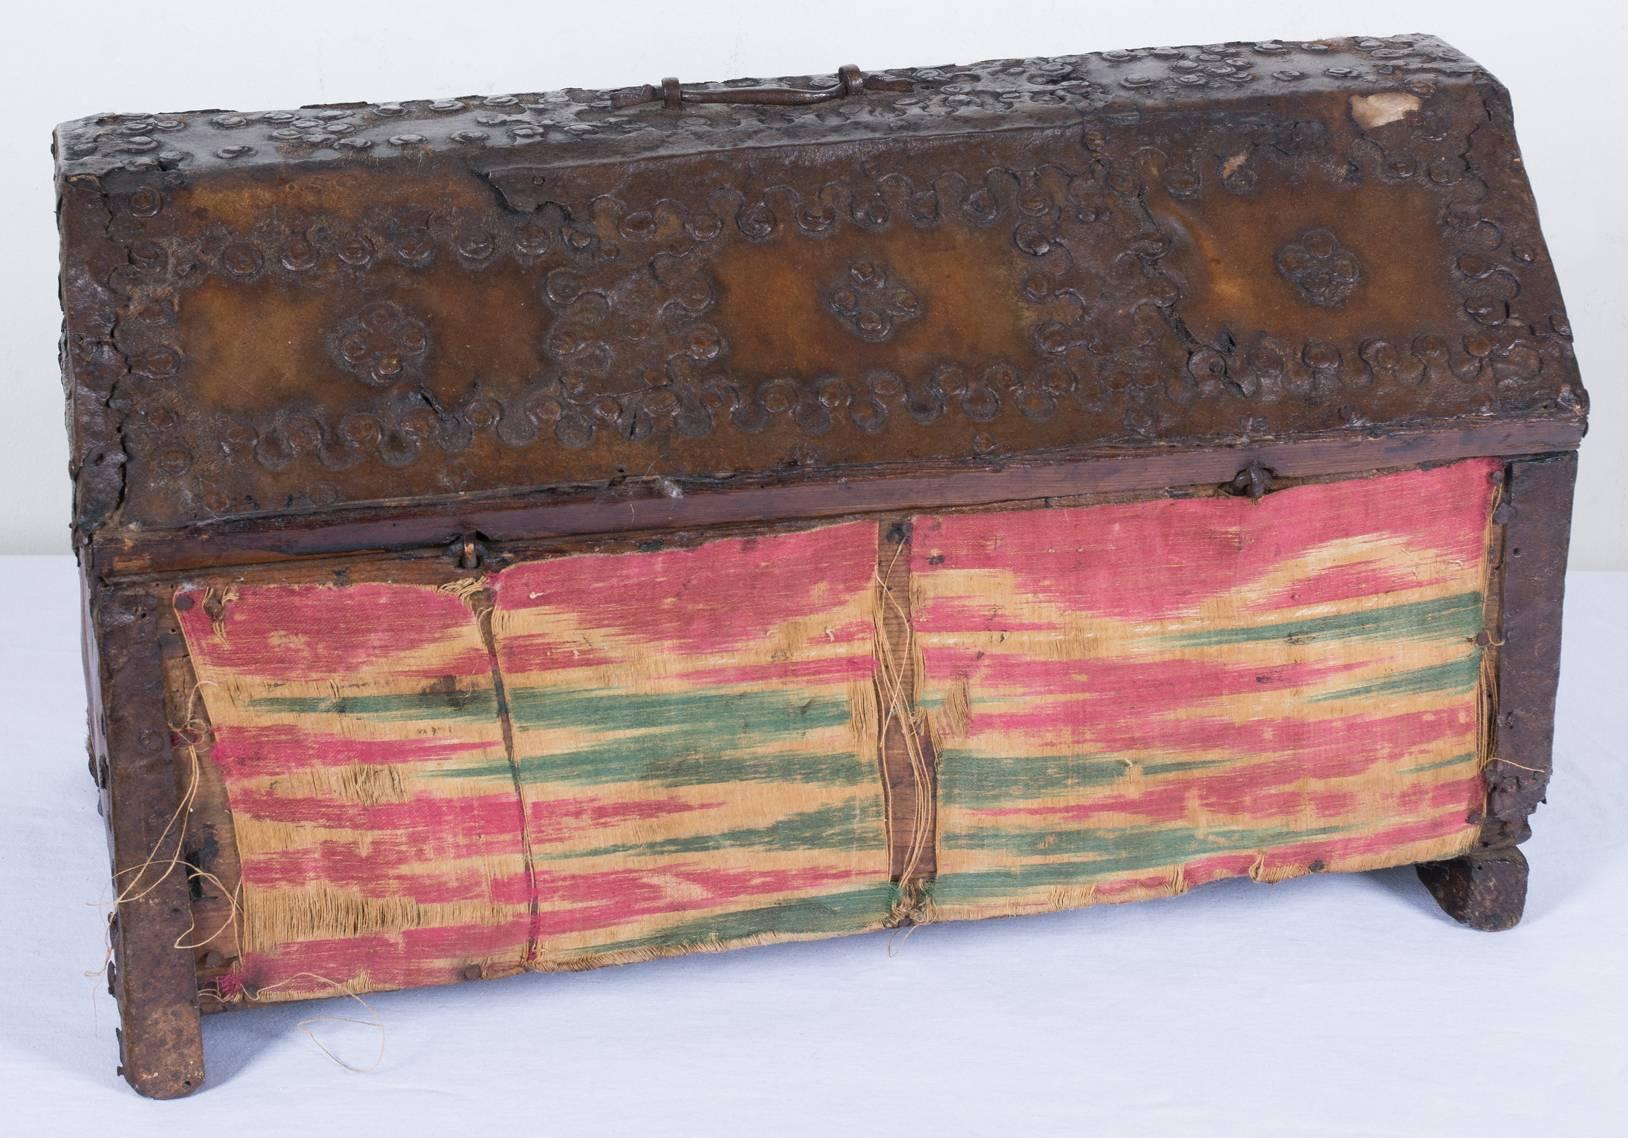 Renaissance 16th Century Spanish Leather and Wood Box with Ironwork For Sale